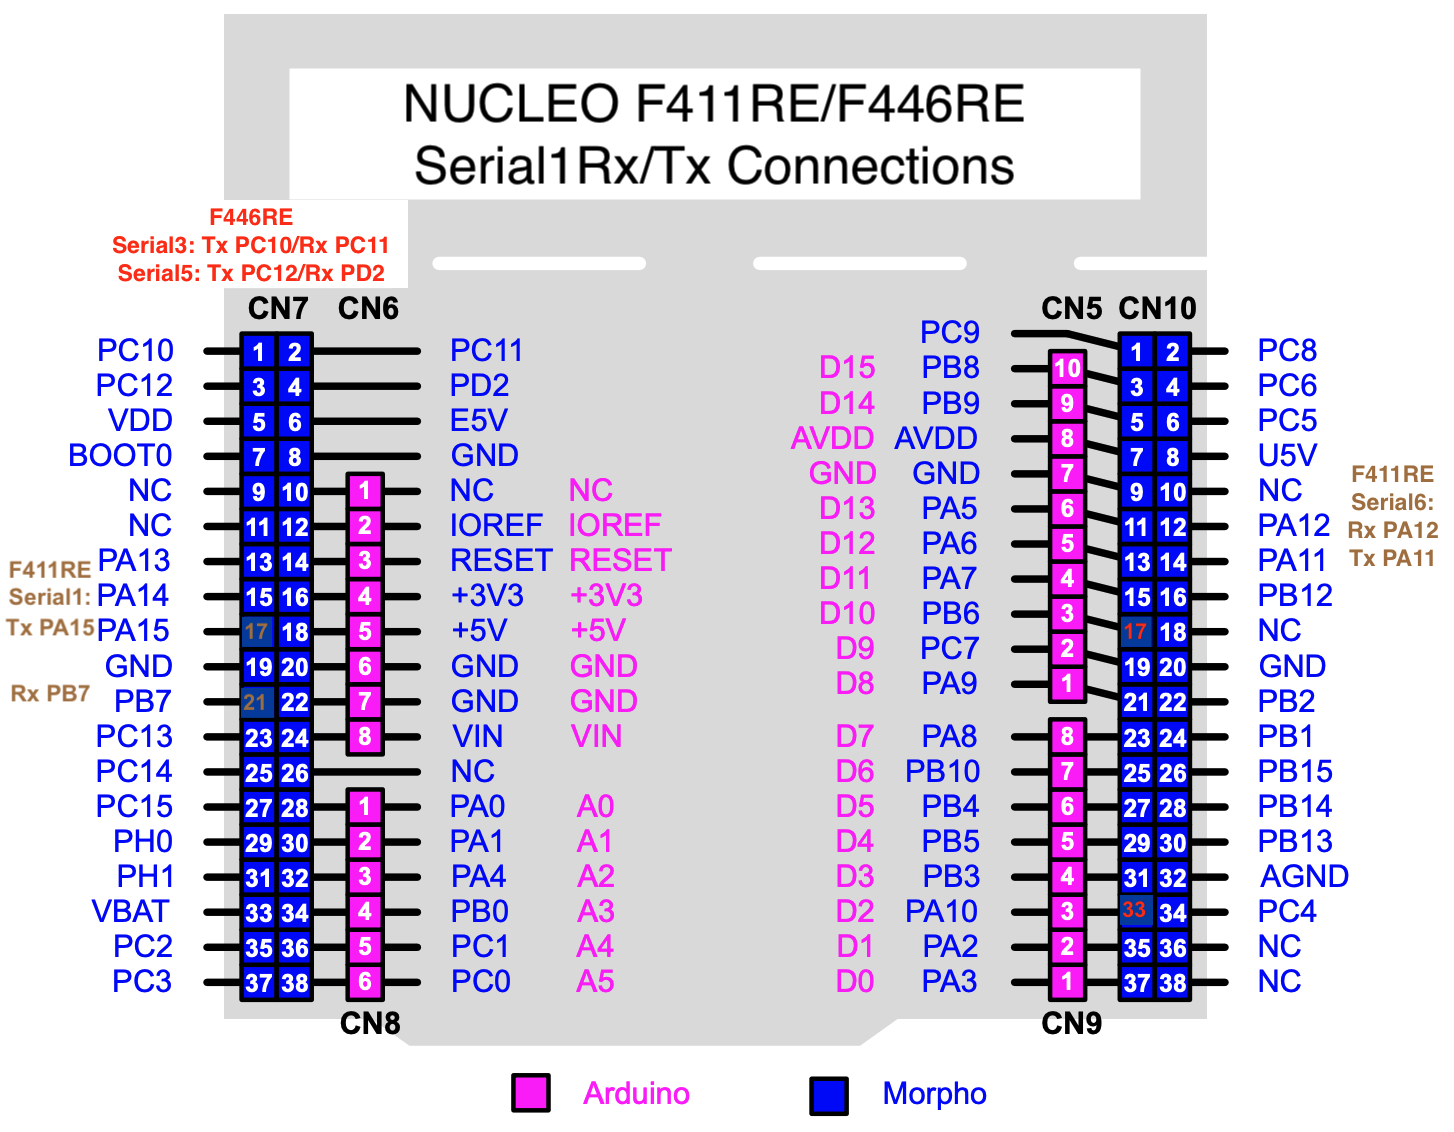 NUCLEO F411RE/F446RE Serial1 Rx/Tx Connections